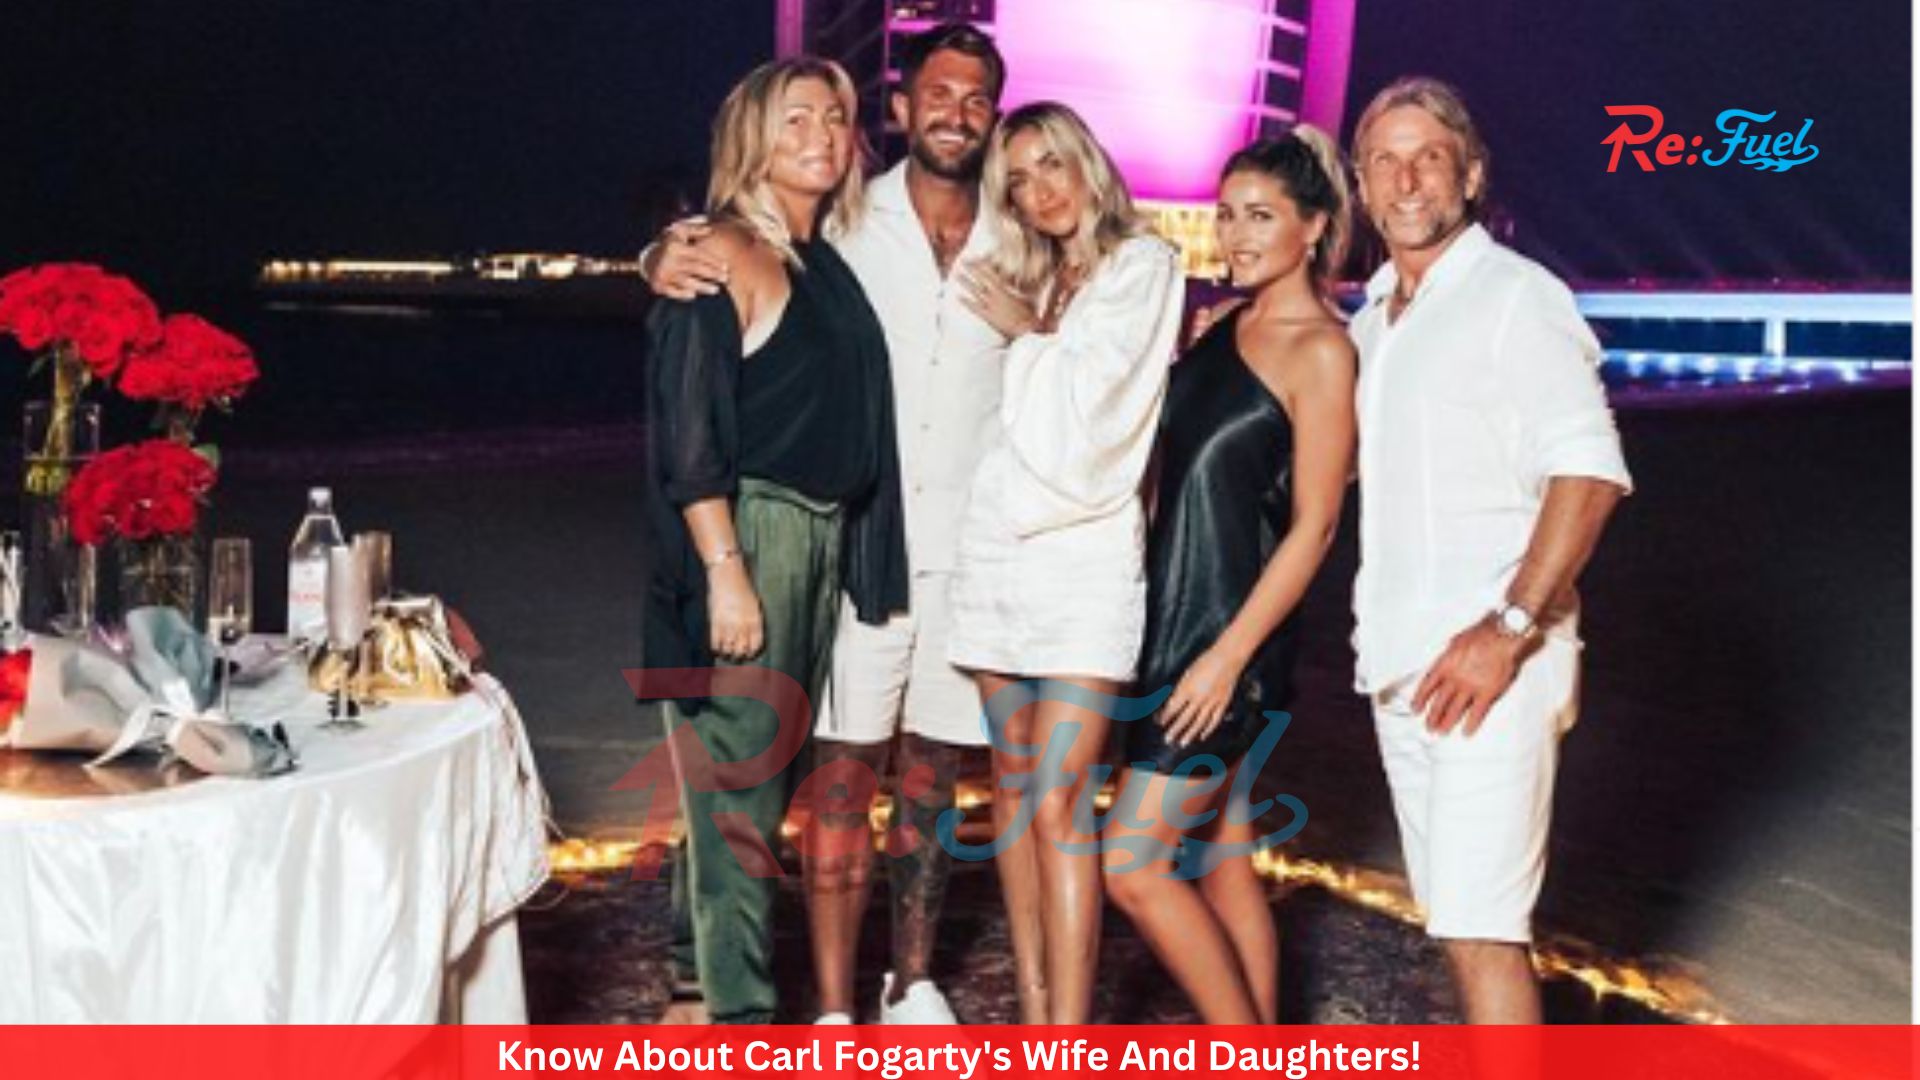 Know About Carl Fogarty's Wife And Daughters!